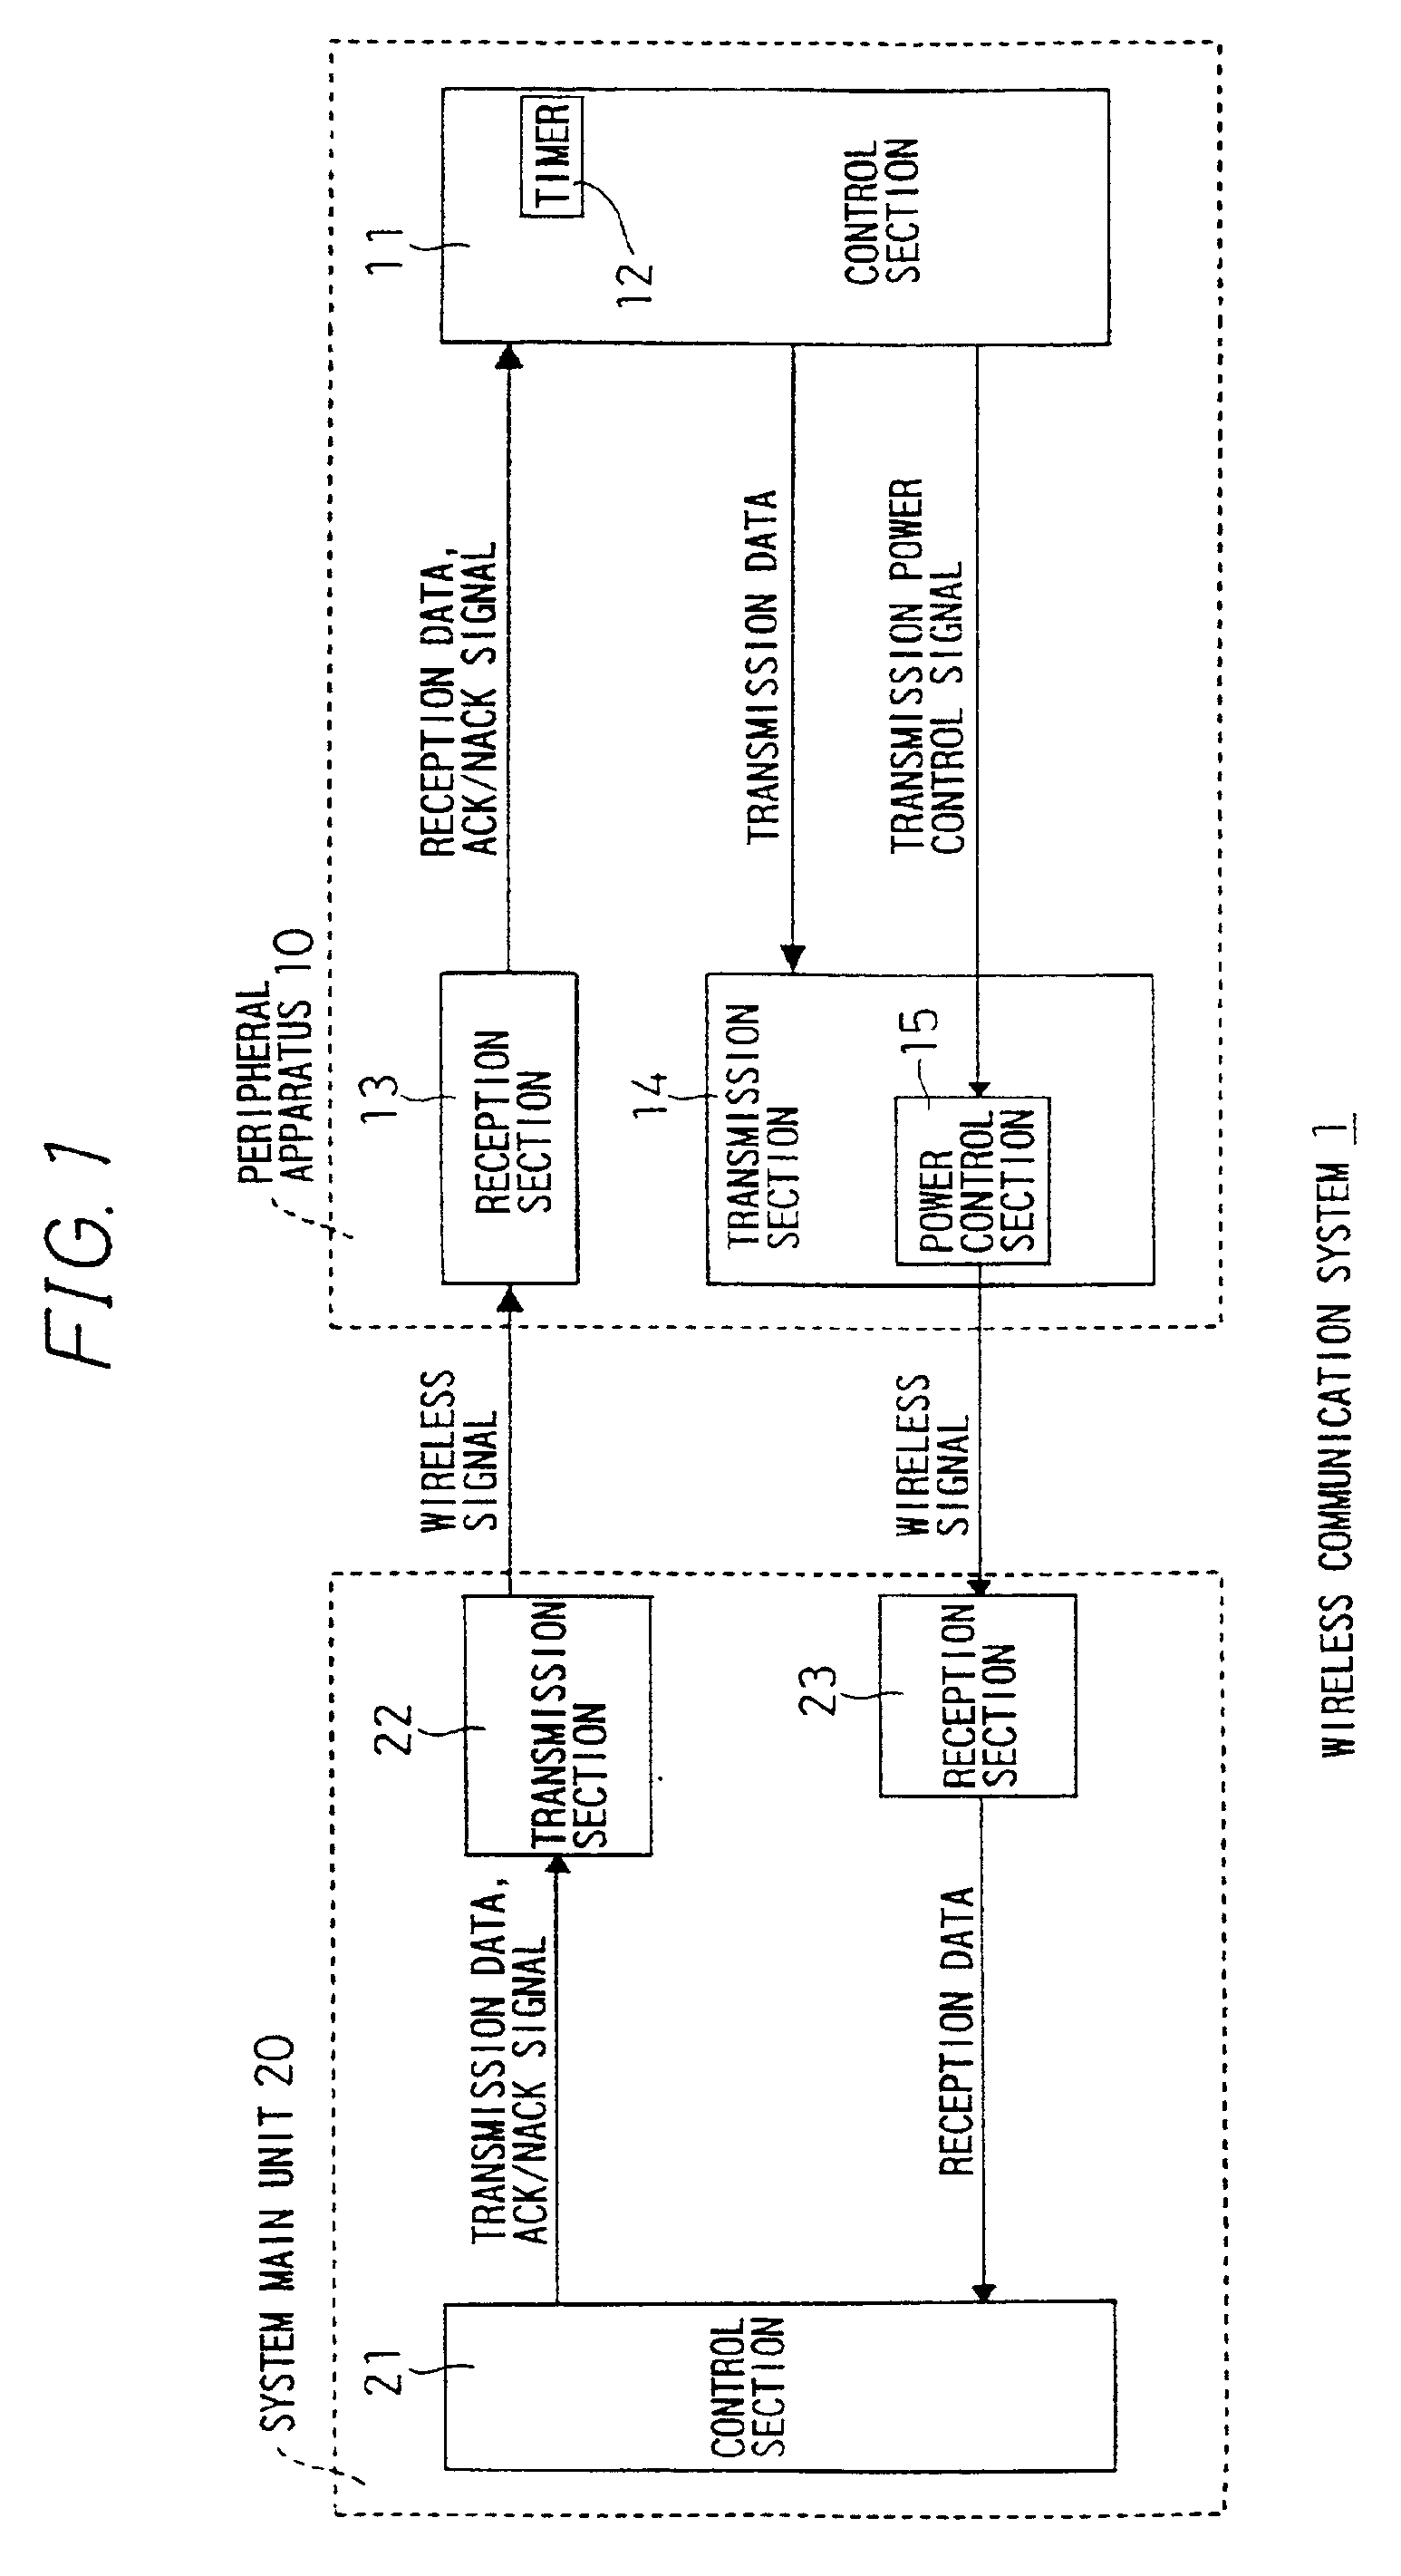 Method of automatically controlling transmission power of wireless communication apparatus, and storage medium on which the same is stored